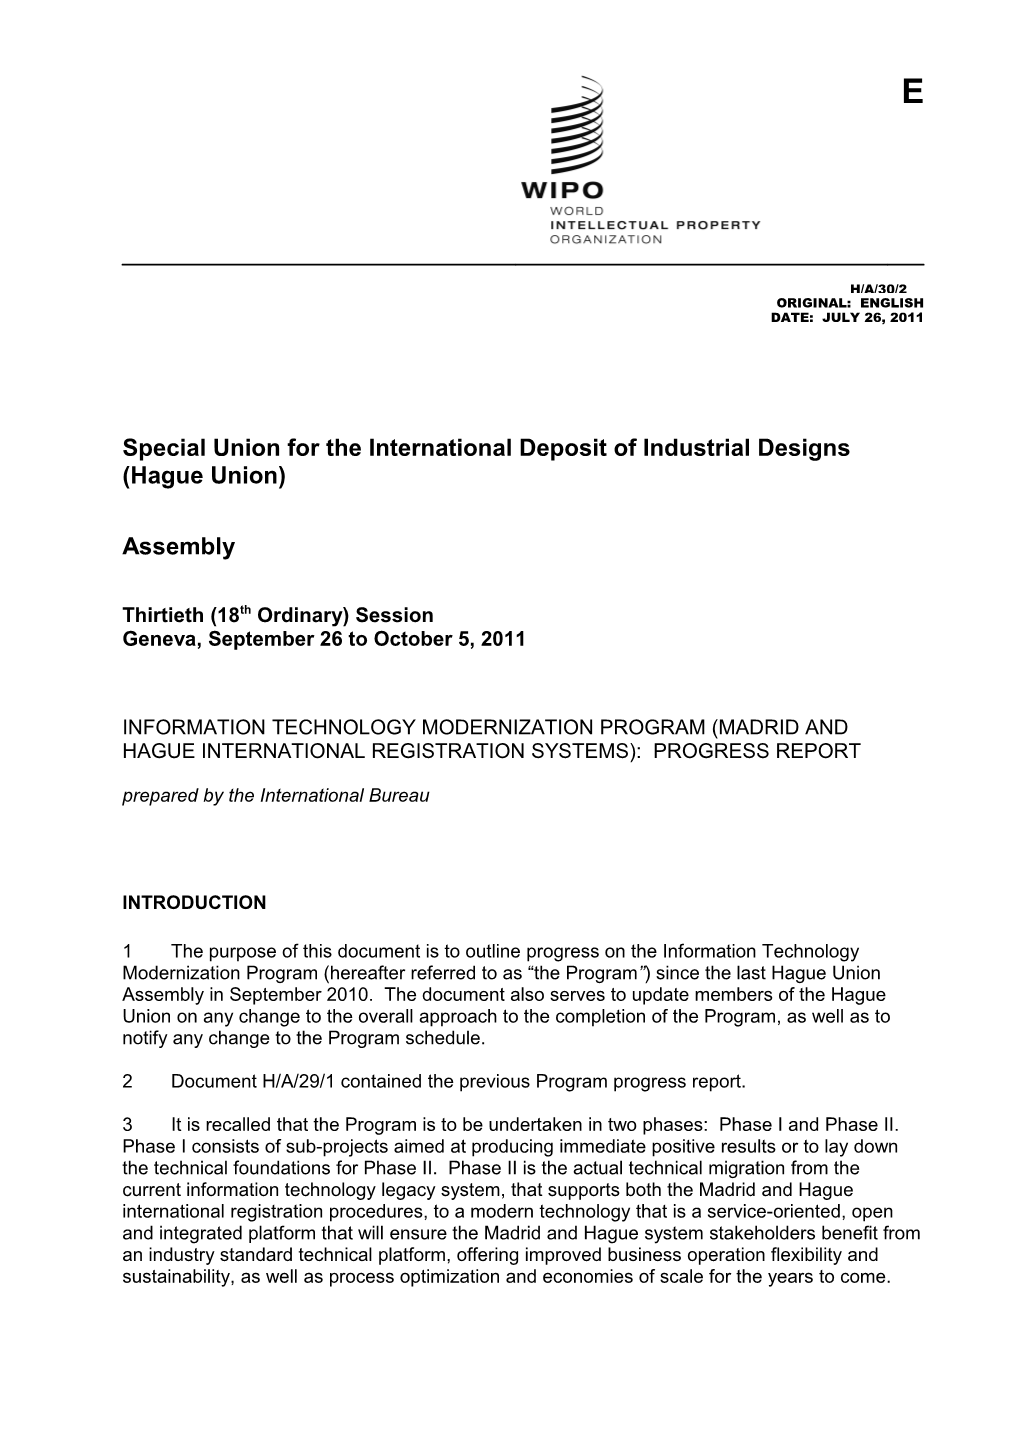 Special Union for the International Deposit of Industrial Designs (Hague Union)